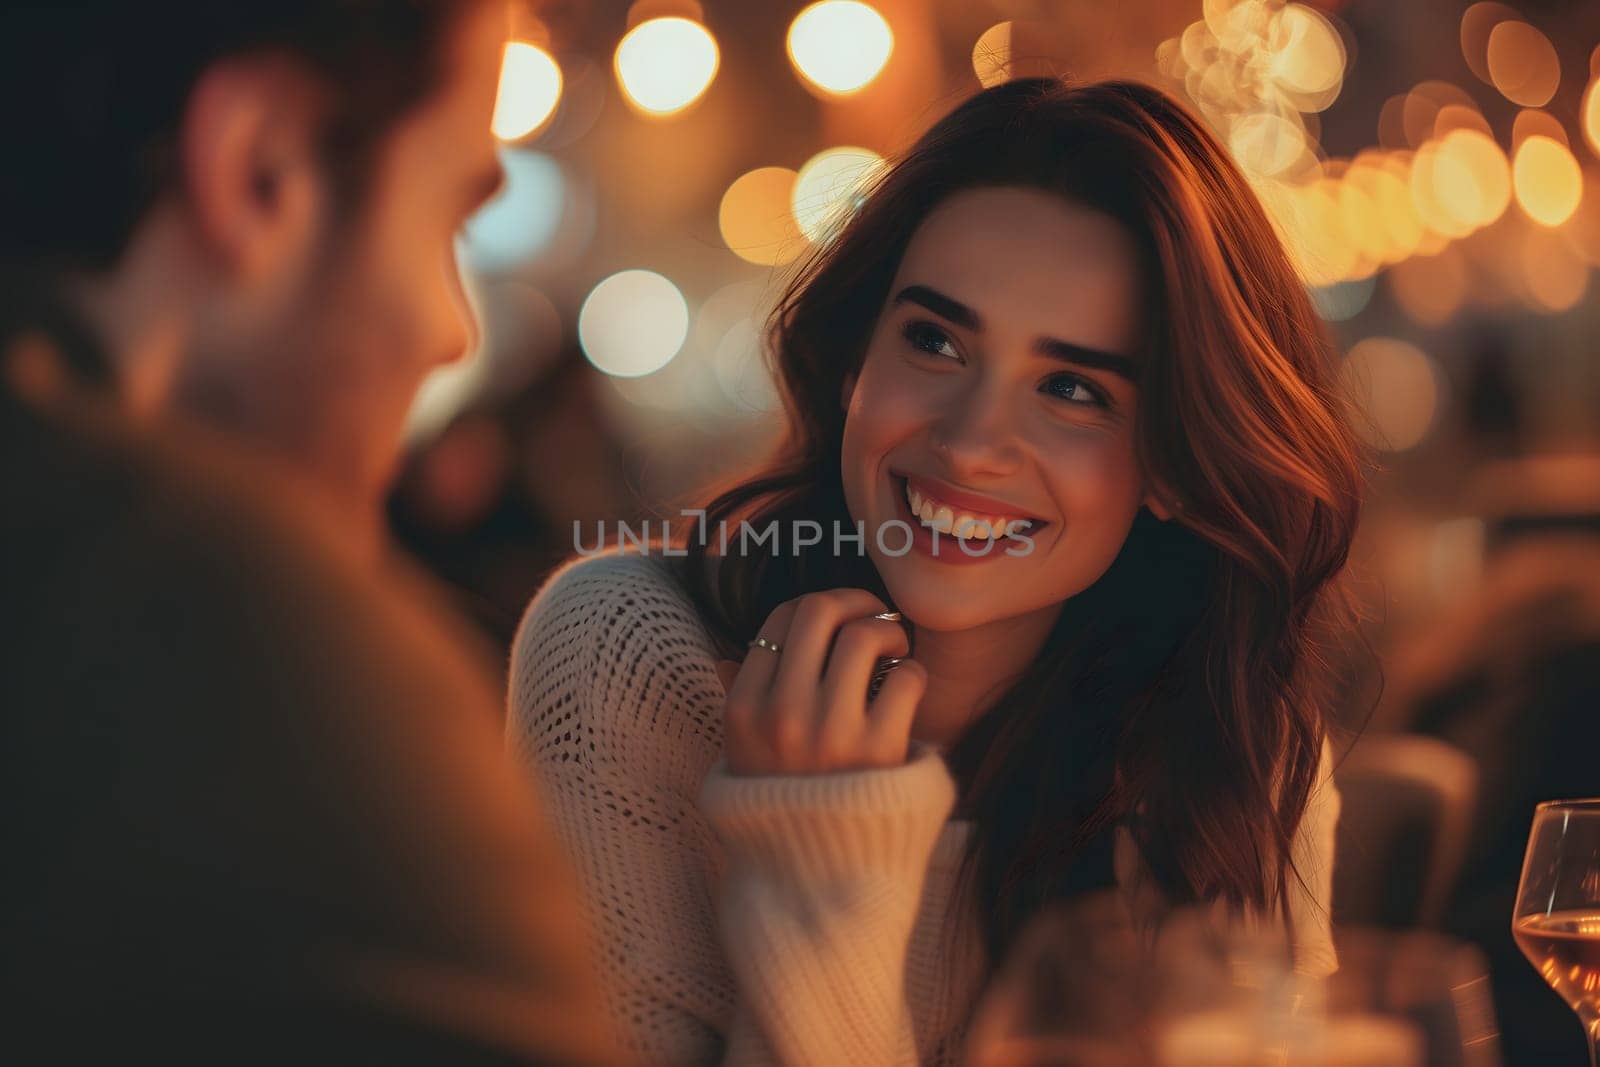 Smiling young adult woman dating with young adult man at the restaurant. Neural network generated image. Not based on any actual scene or pattern.